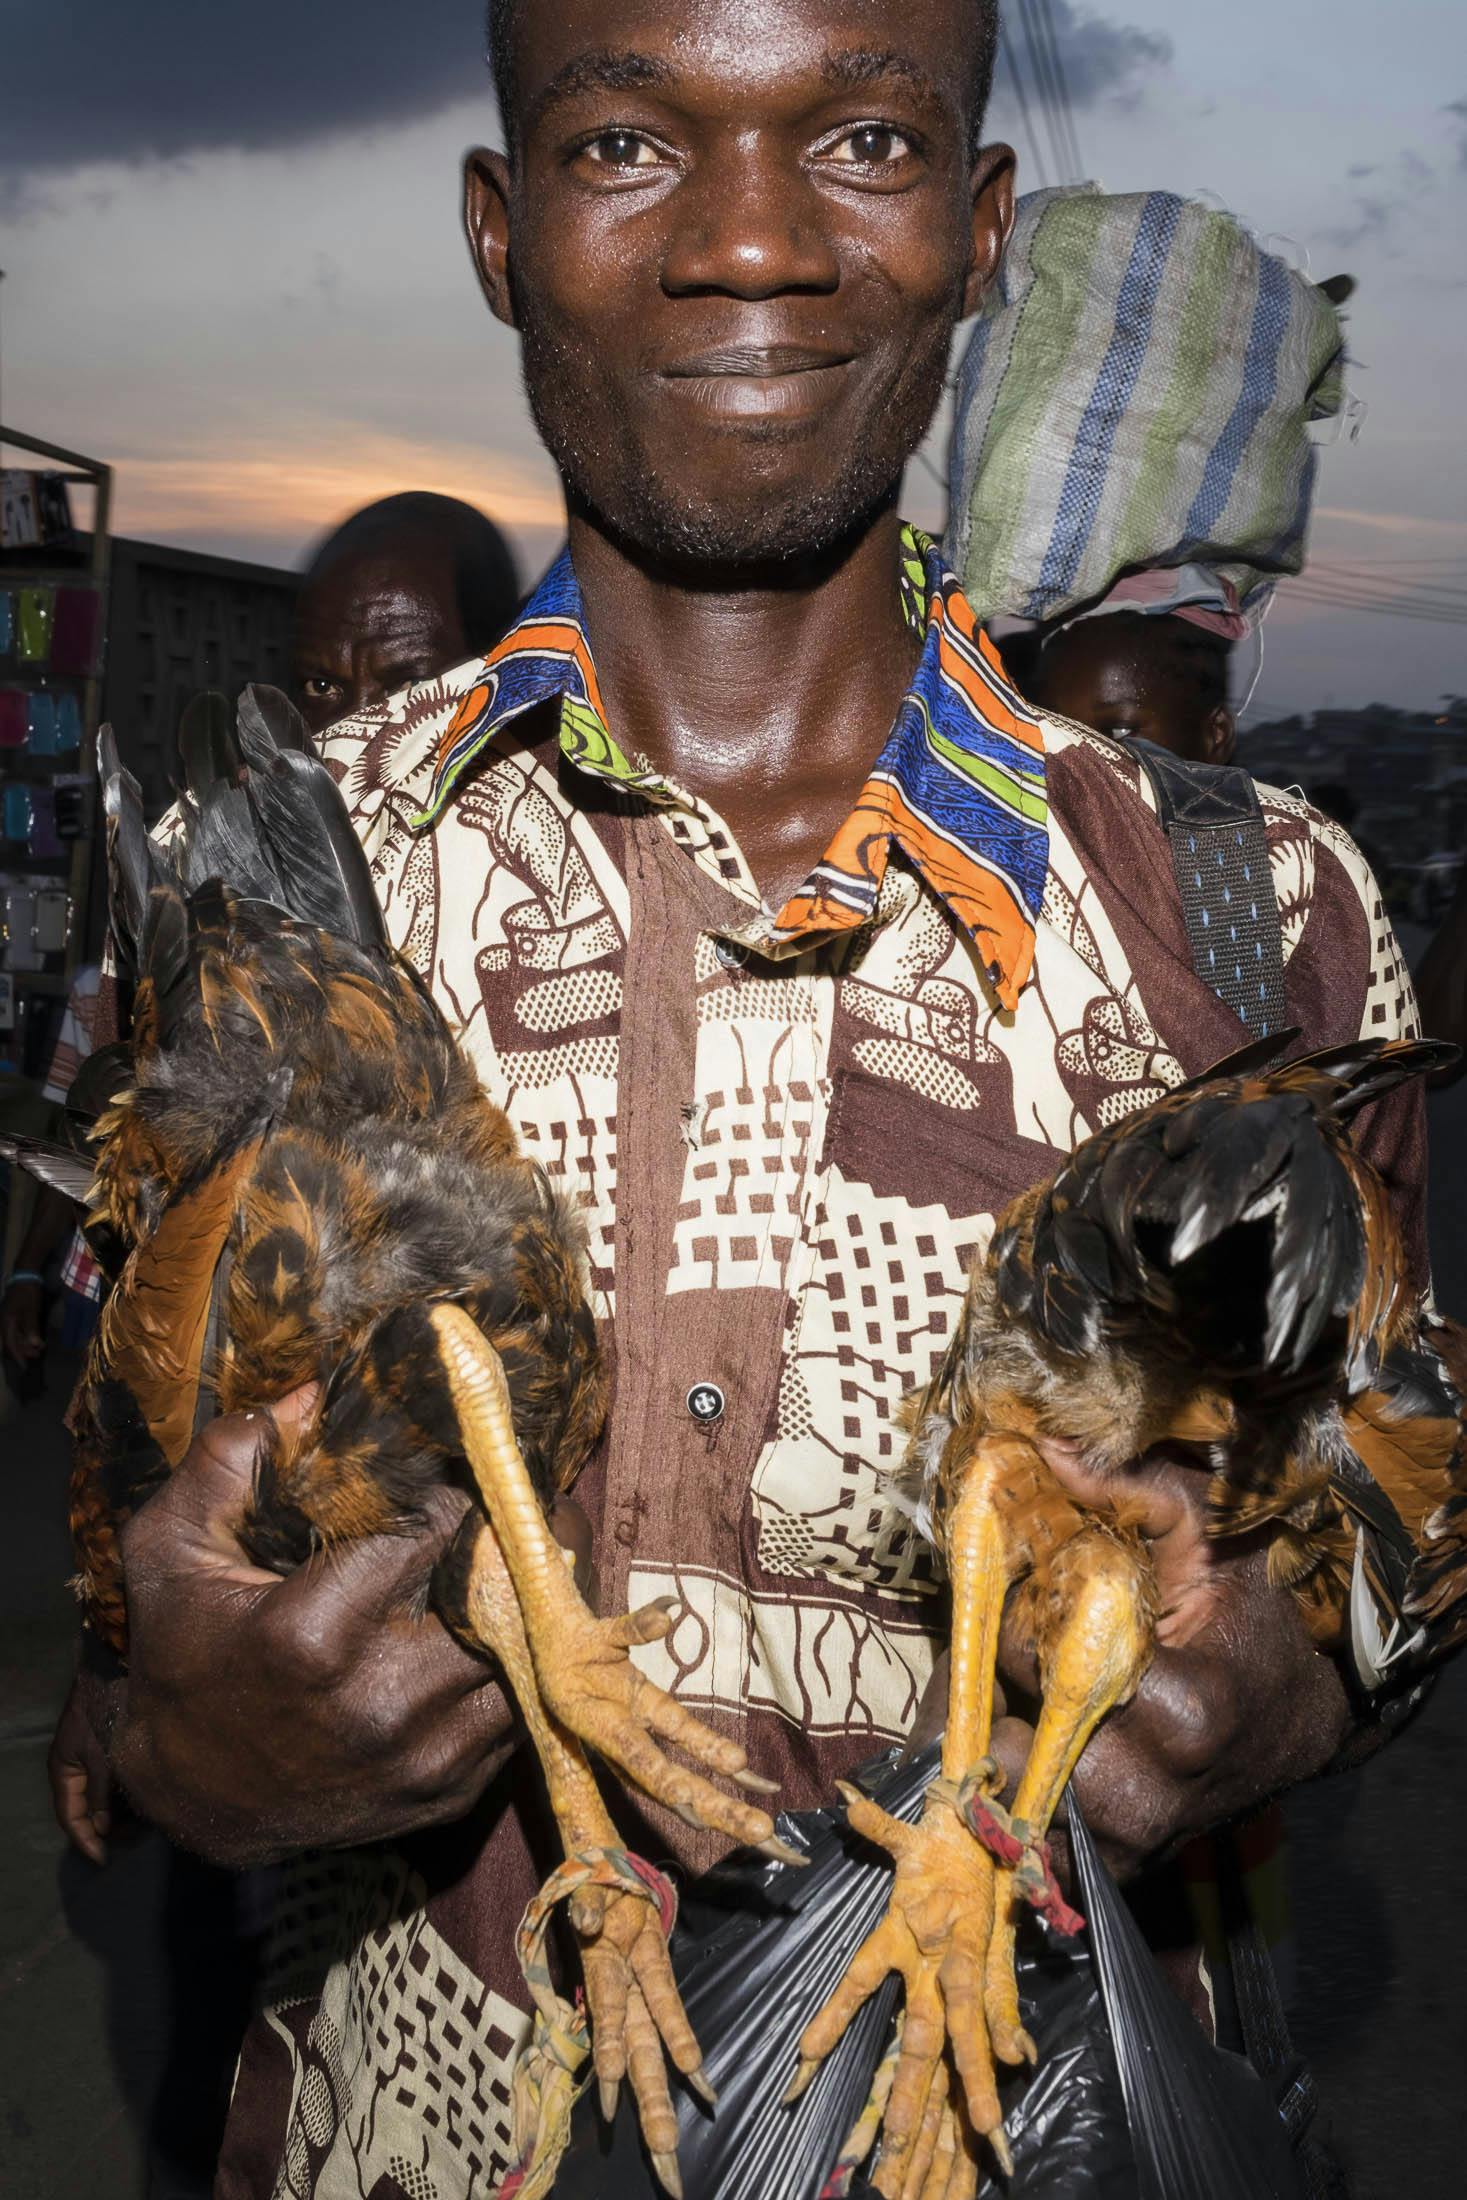 Man holding two chickens in Ghana